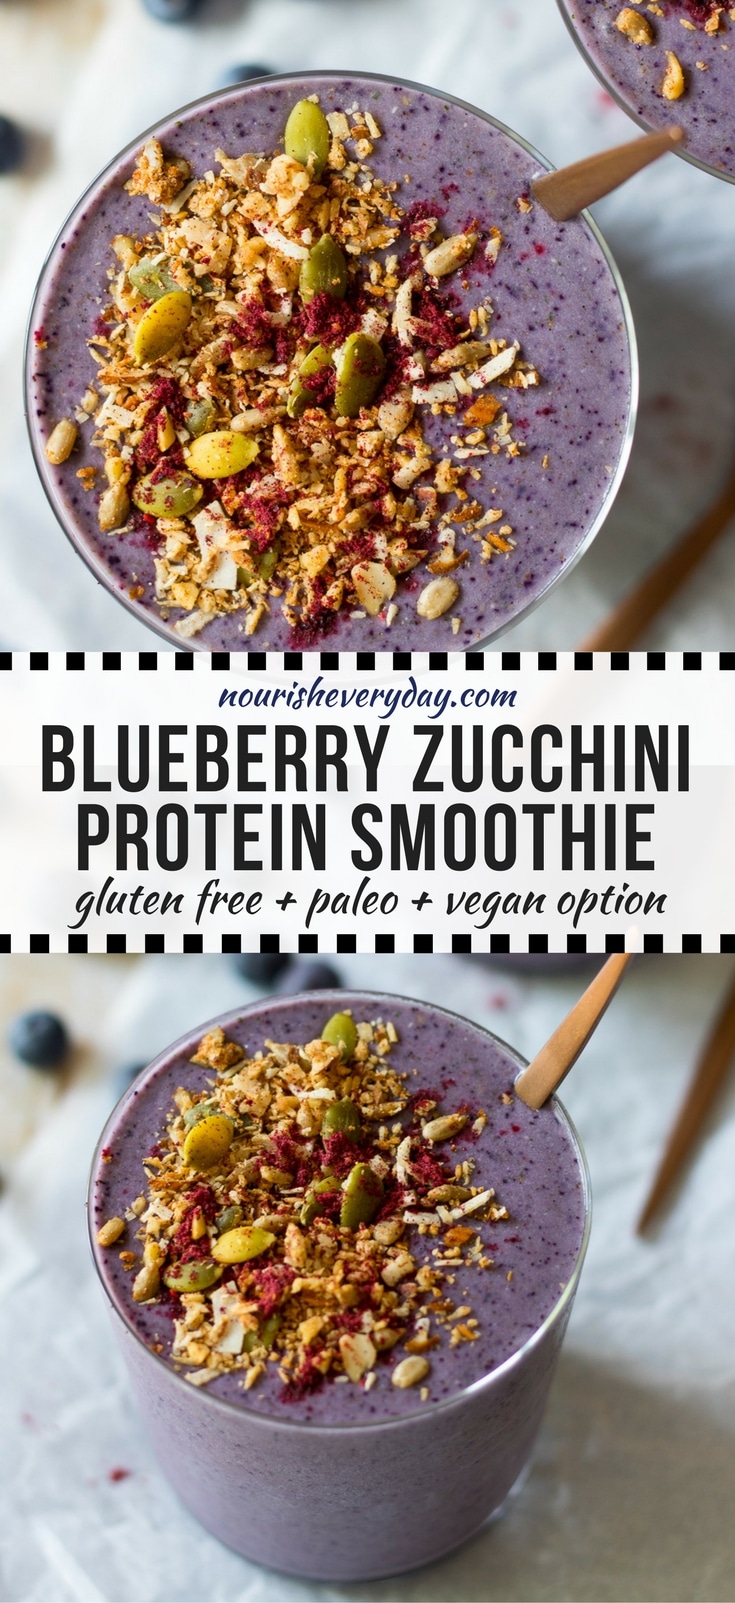 Blueberry Zucchini Protein Smoothie (gluten free, paleo, vegan option) - easy and delicious, this smoothie made with frozen zucchini makes a quick breakfast or post workout healthy snack! #smoothie #postworkout #healthysnacks